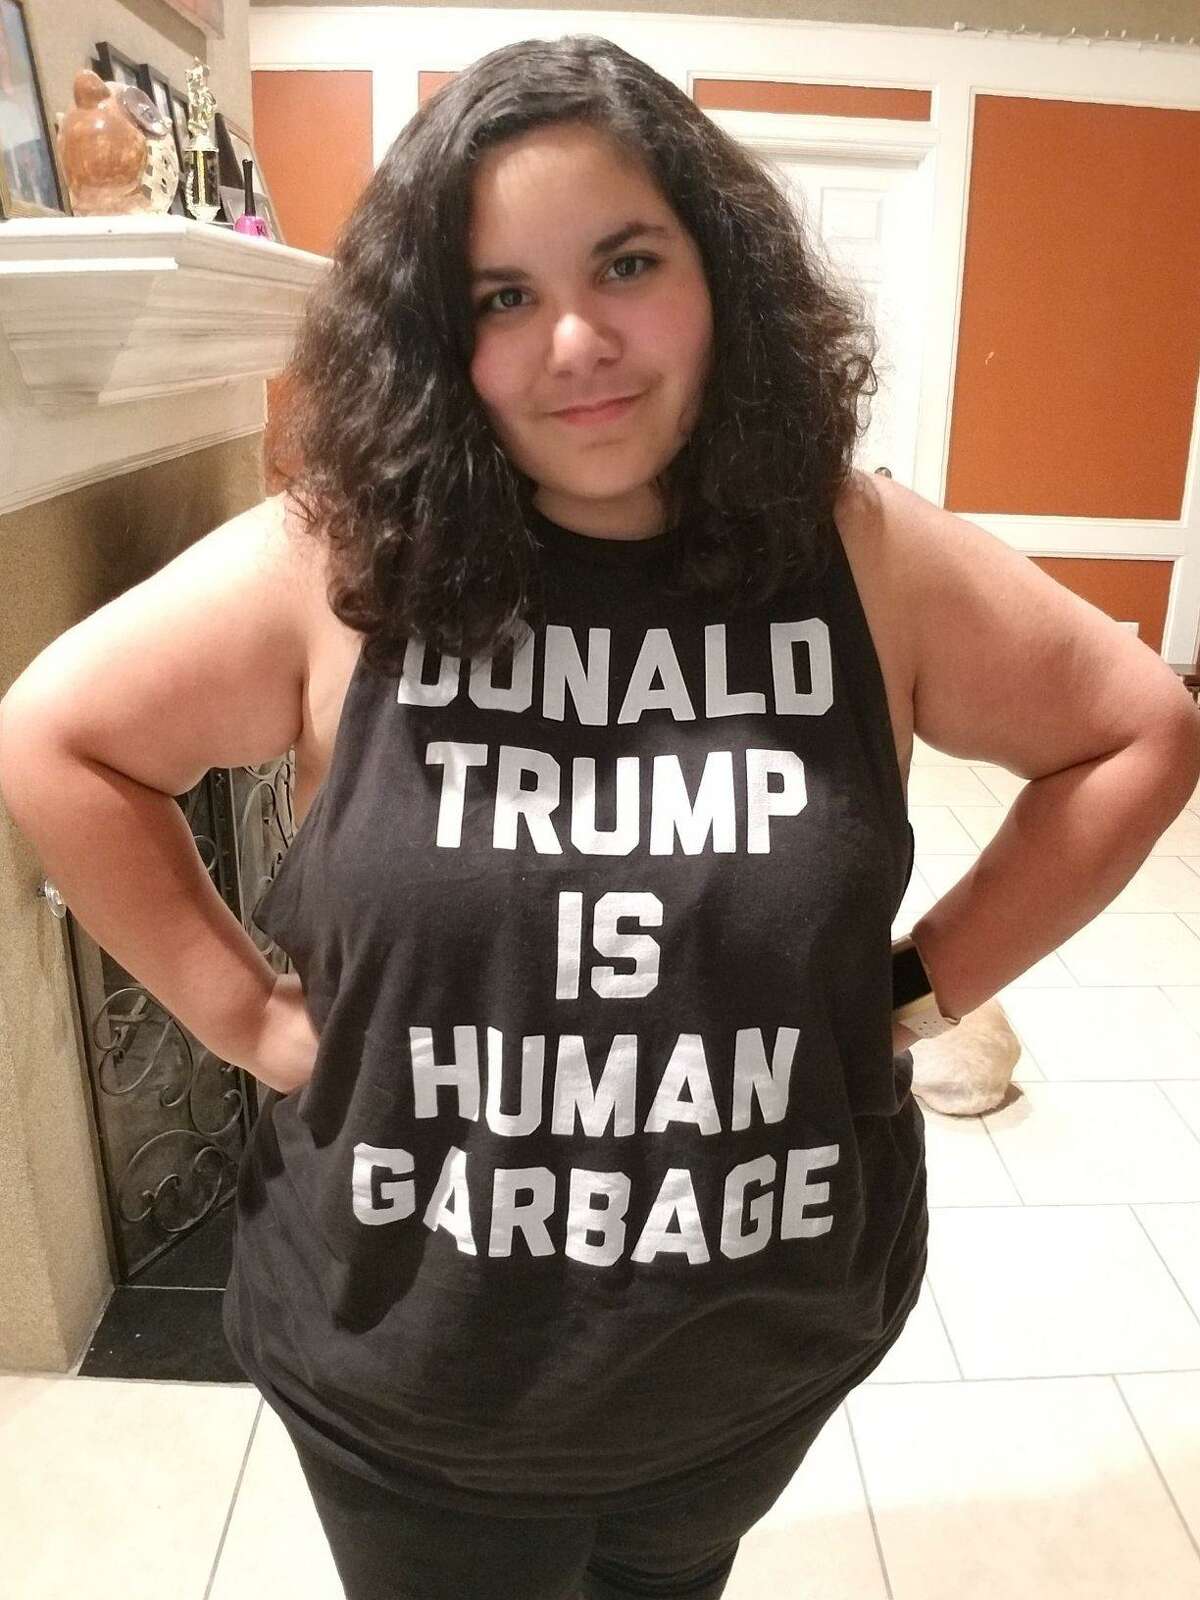 PHOTOS: Celebrities and politicians supporting Trump  Houston woman Ximena Duarte said she was kicked out of a gym in Cypress because people complained about the message on her T-shirt, which read "Donald Trump is human garbage." >>> See the notable celebrities and politicians who support the president 